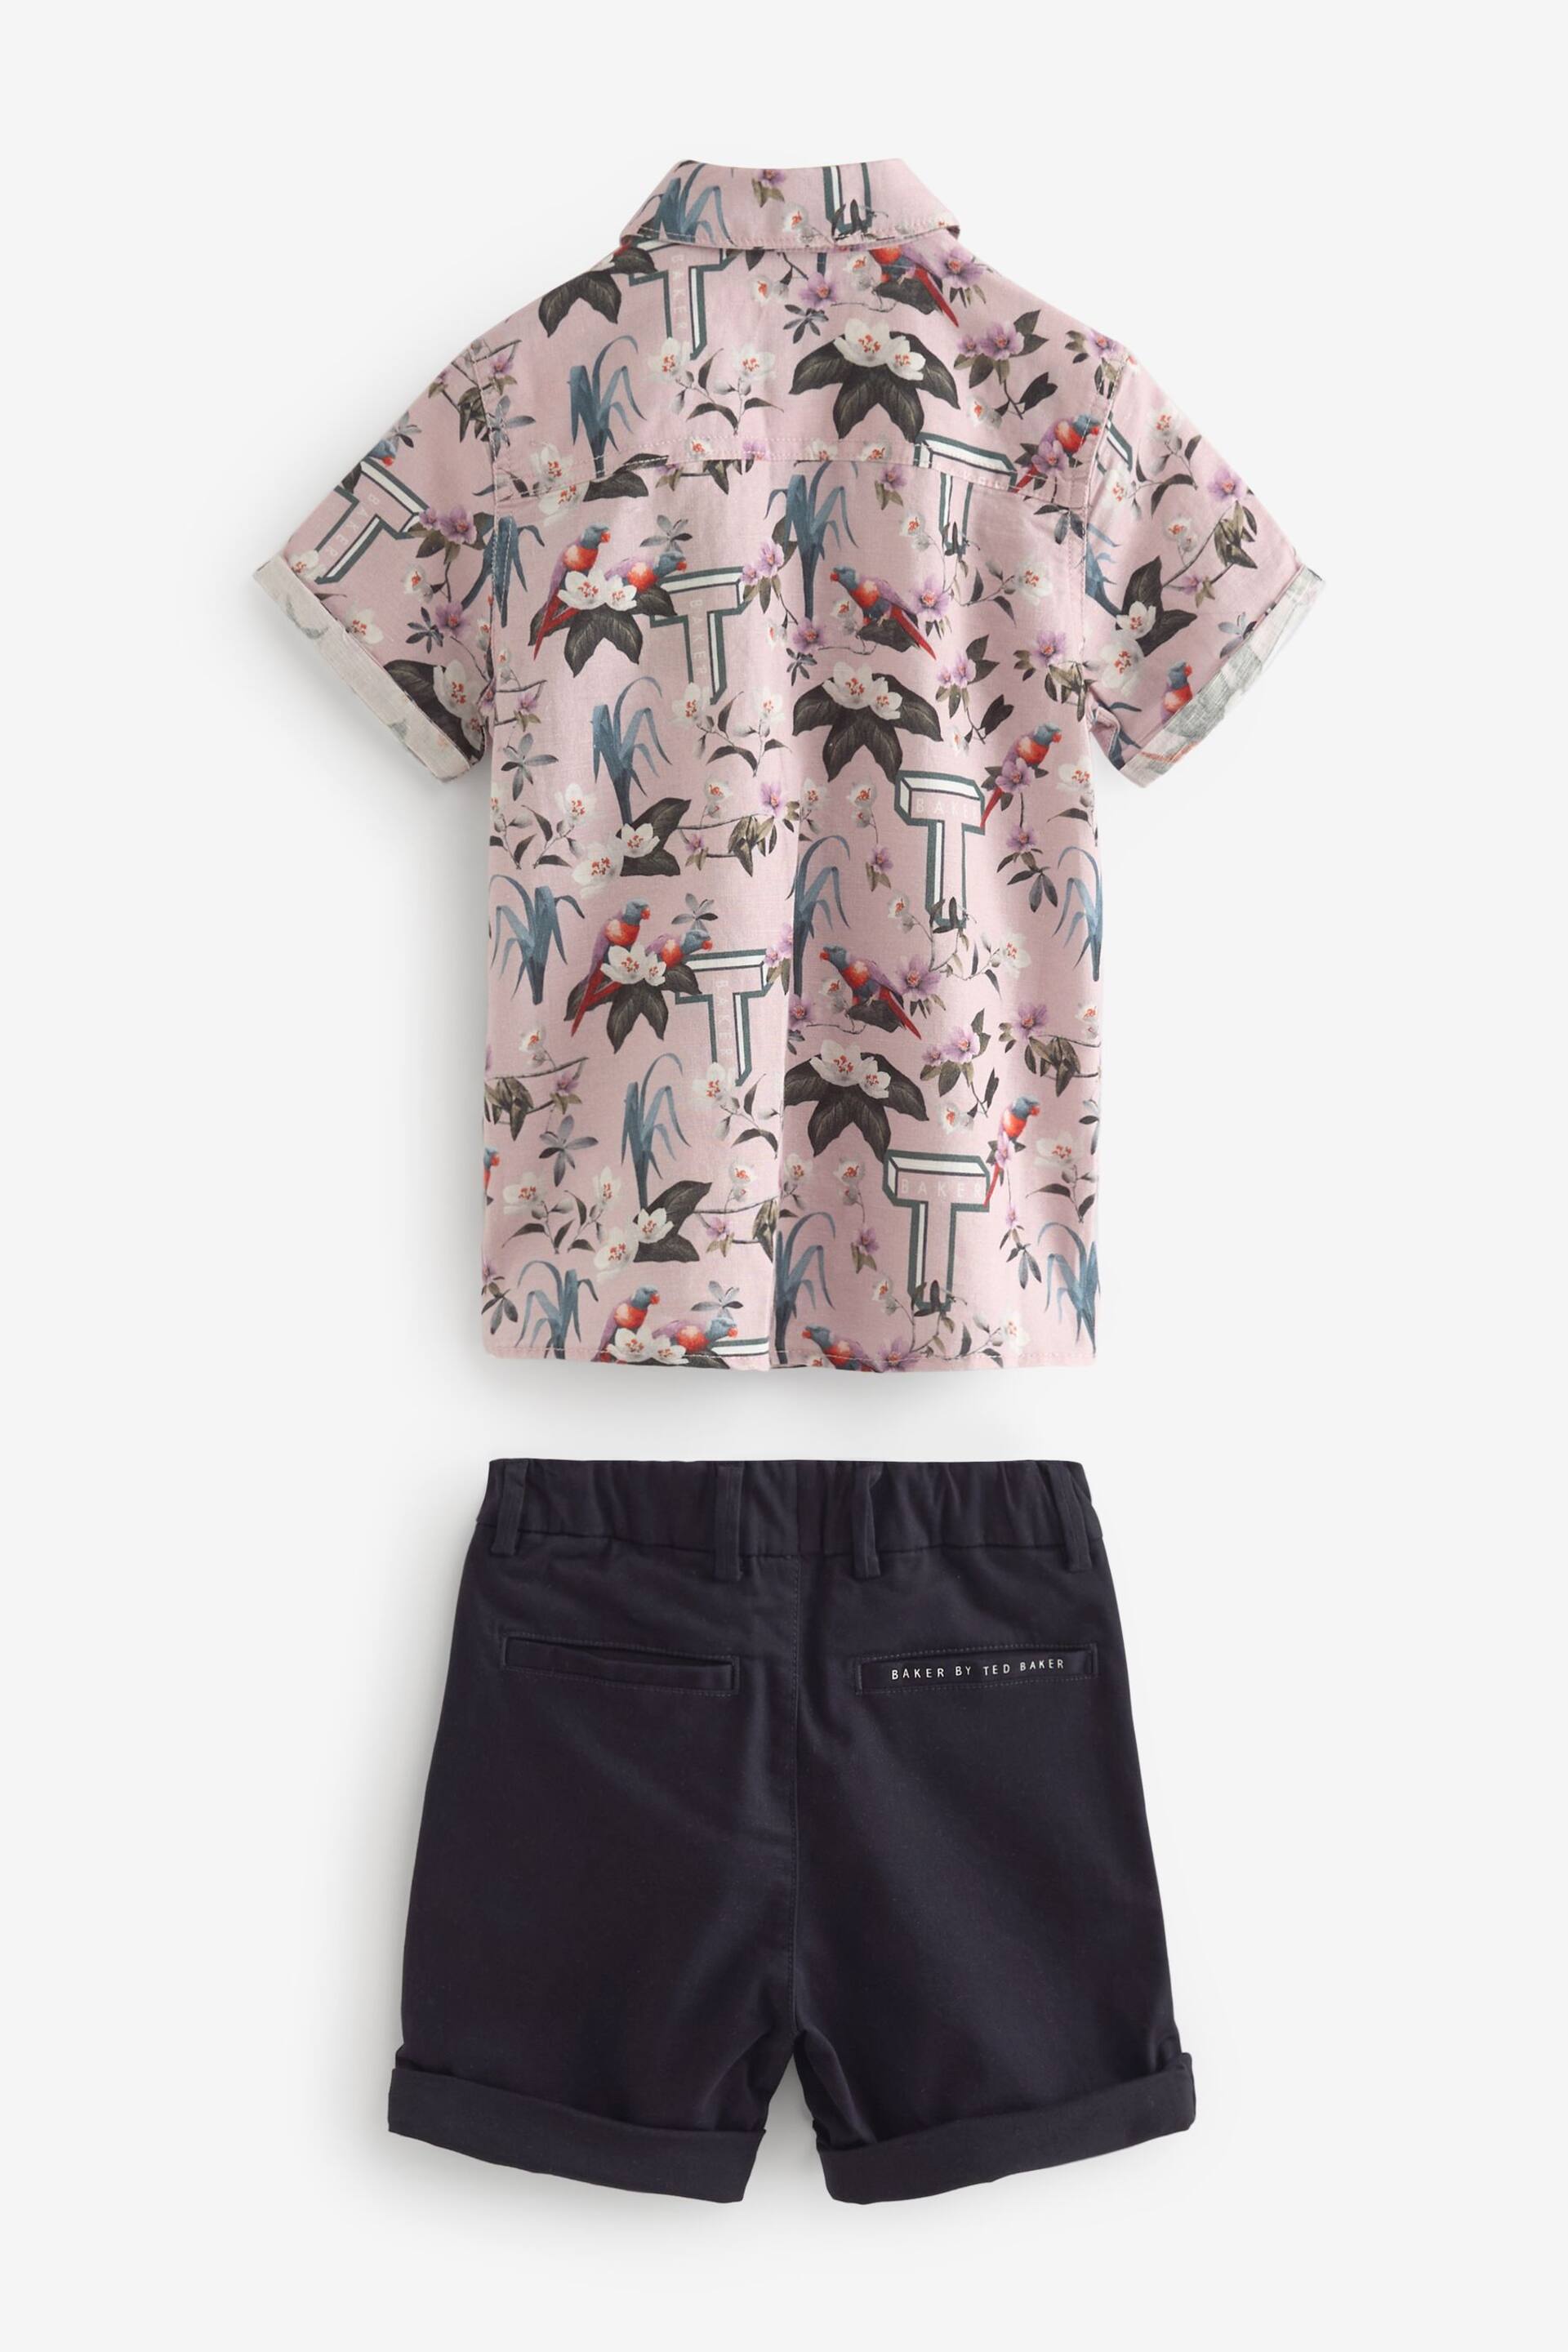 Baker by Ted Baker Shirt And Shorts Set - Image 6 of 8